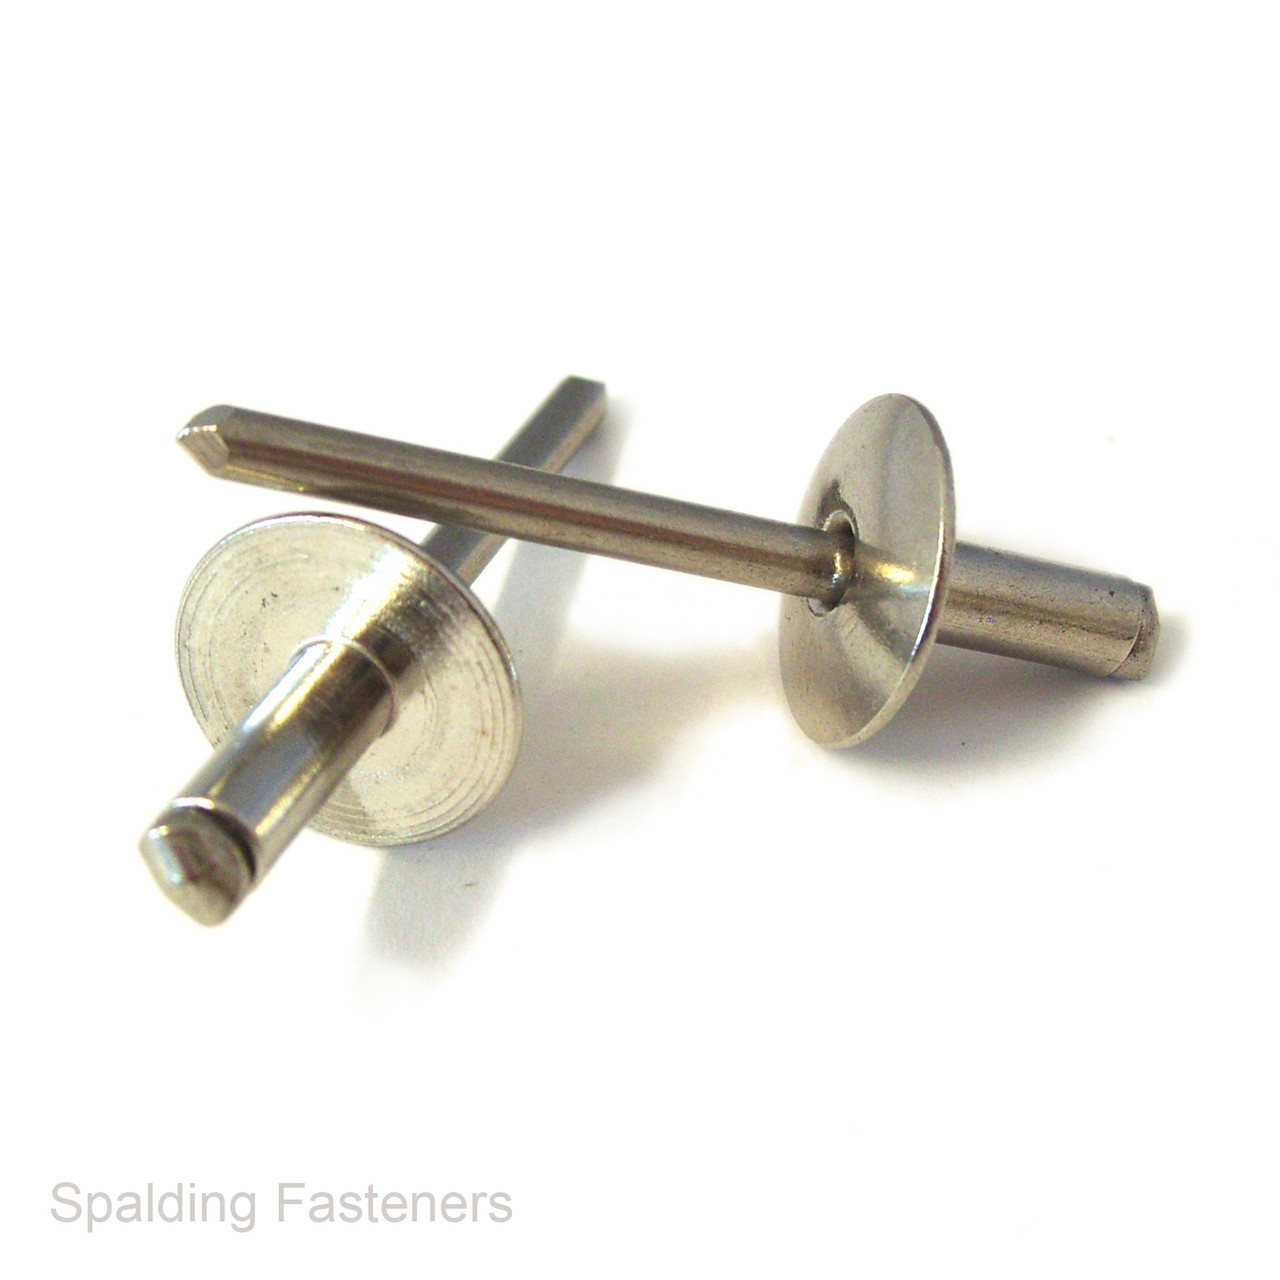 Assorted 120 Stainless Steel Flange Pop Rivets - 3.2, 4.0 & 4.8mm